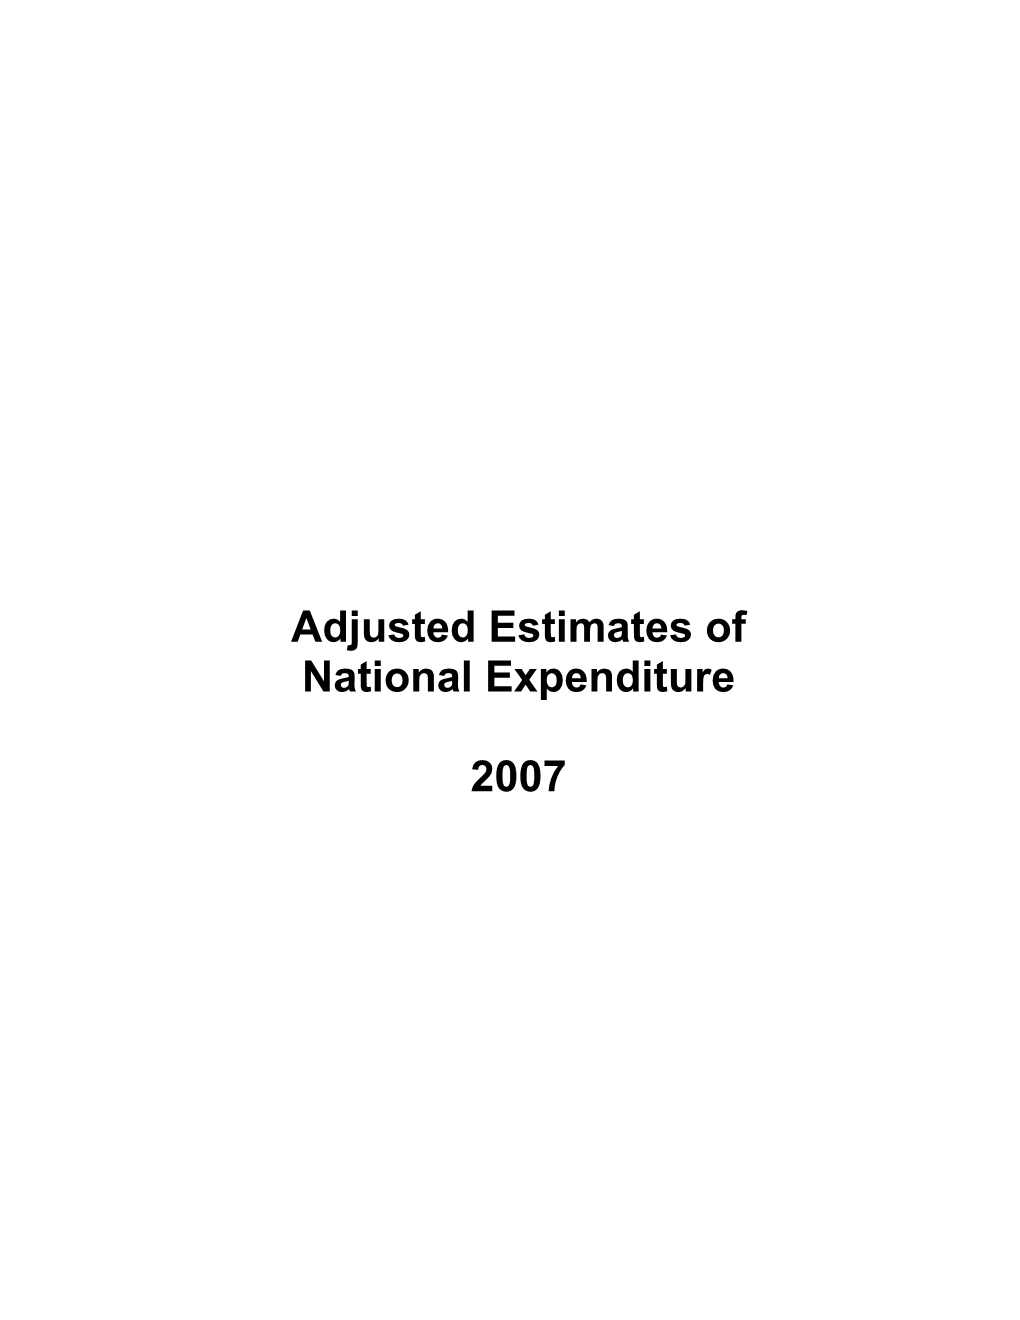 Adjusted Estimates of National Expenditure 2007 Is Also Available On